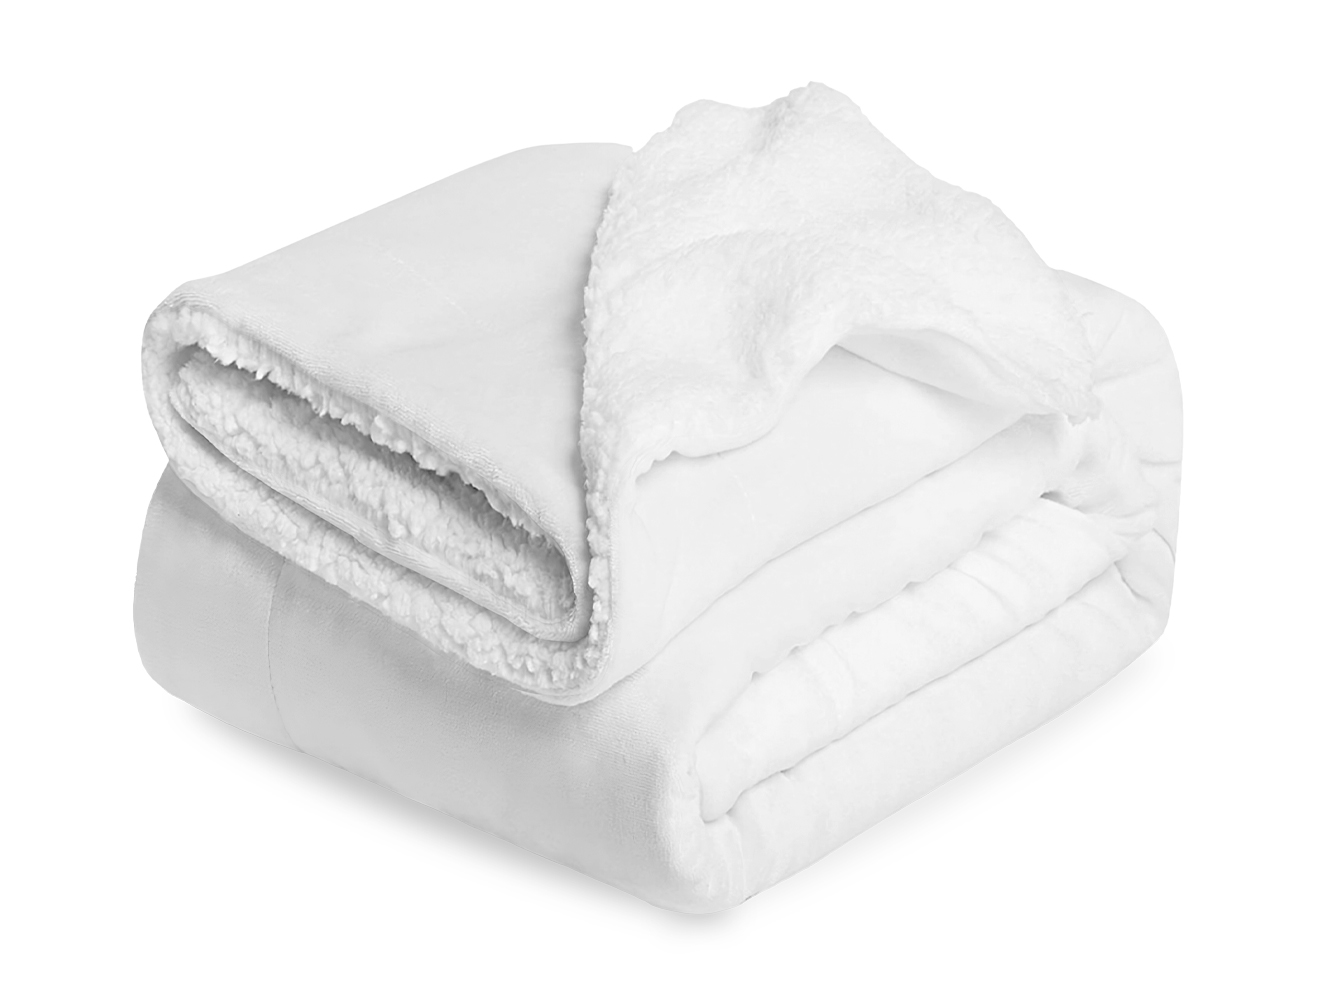 Sublimation Fleece Blanket with Sherpa Lining 152 x 203 cm - White